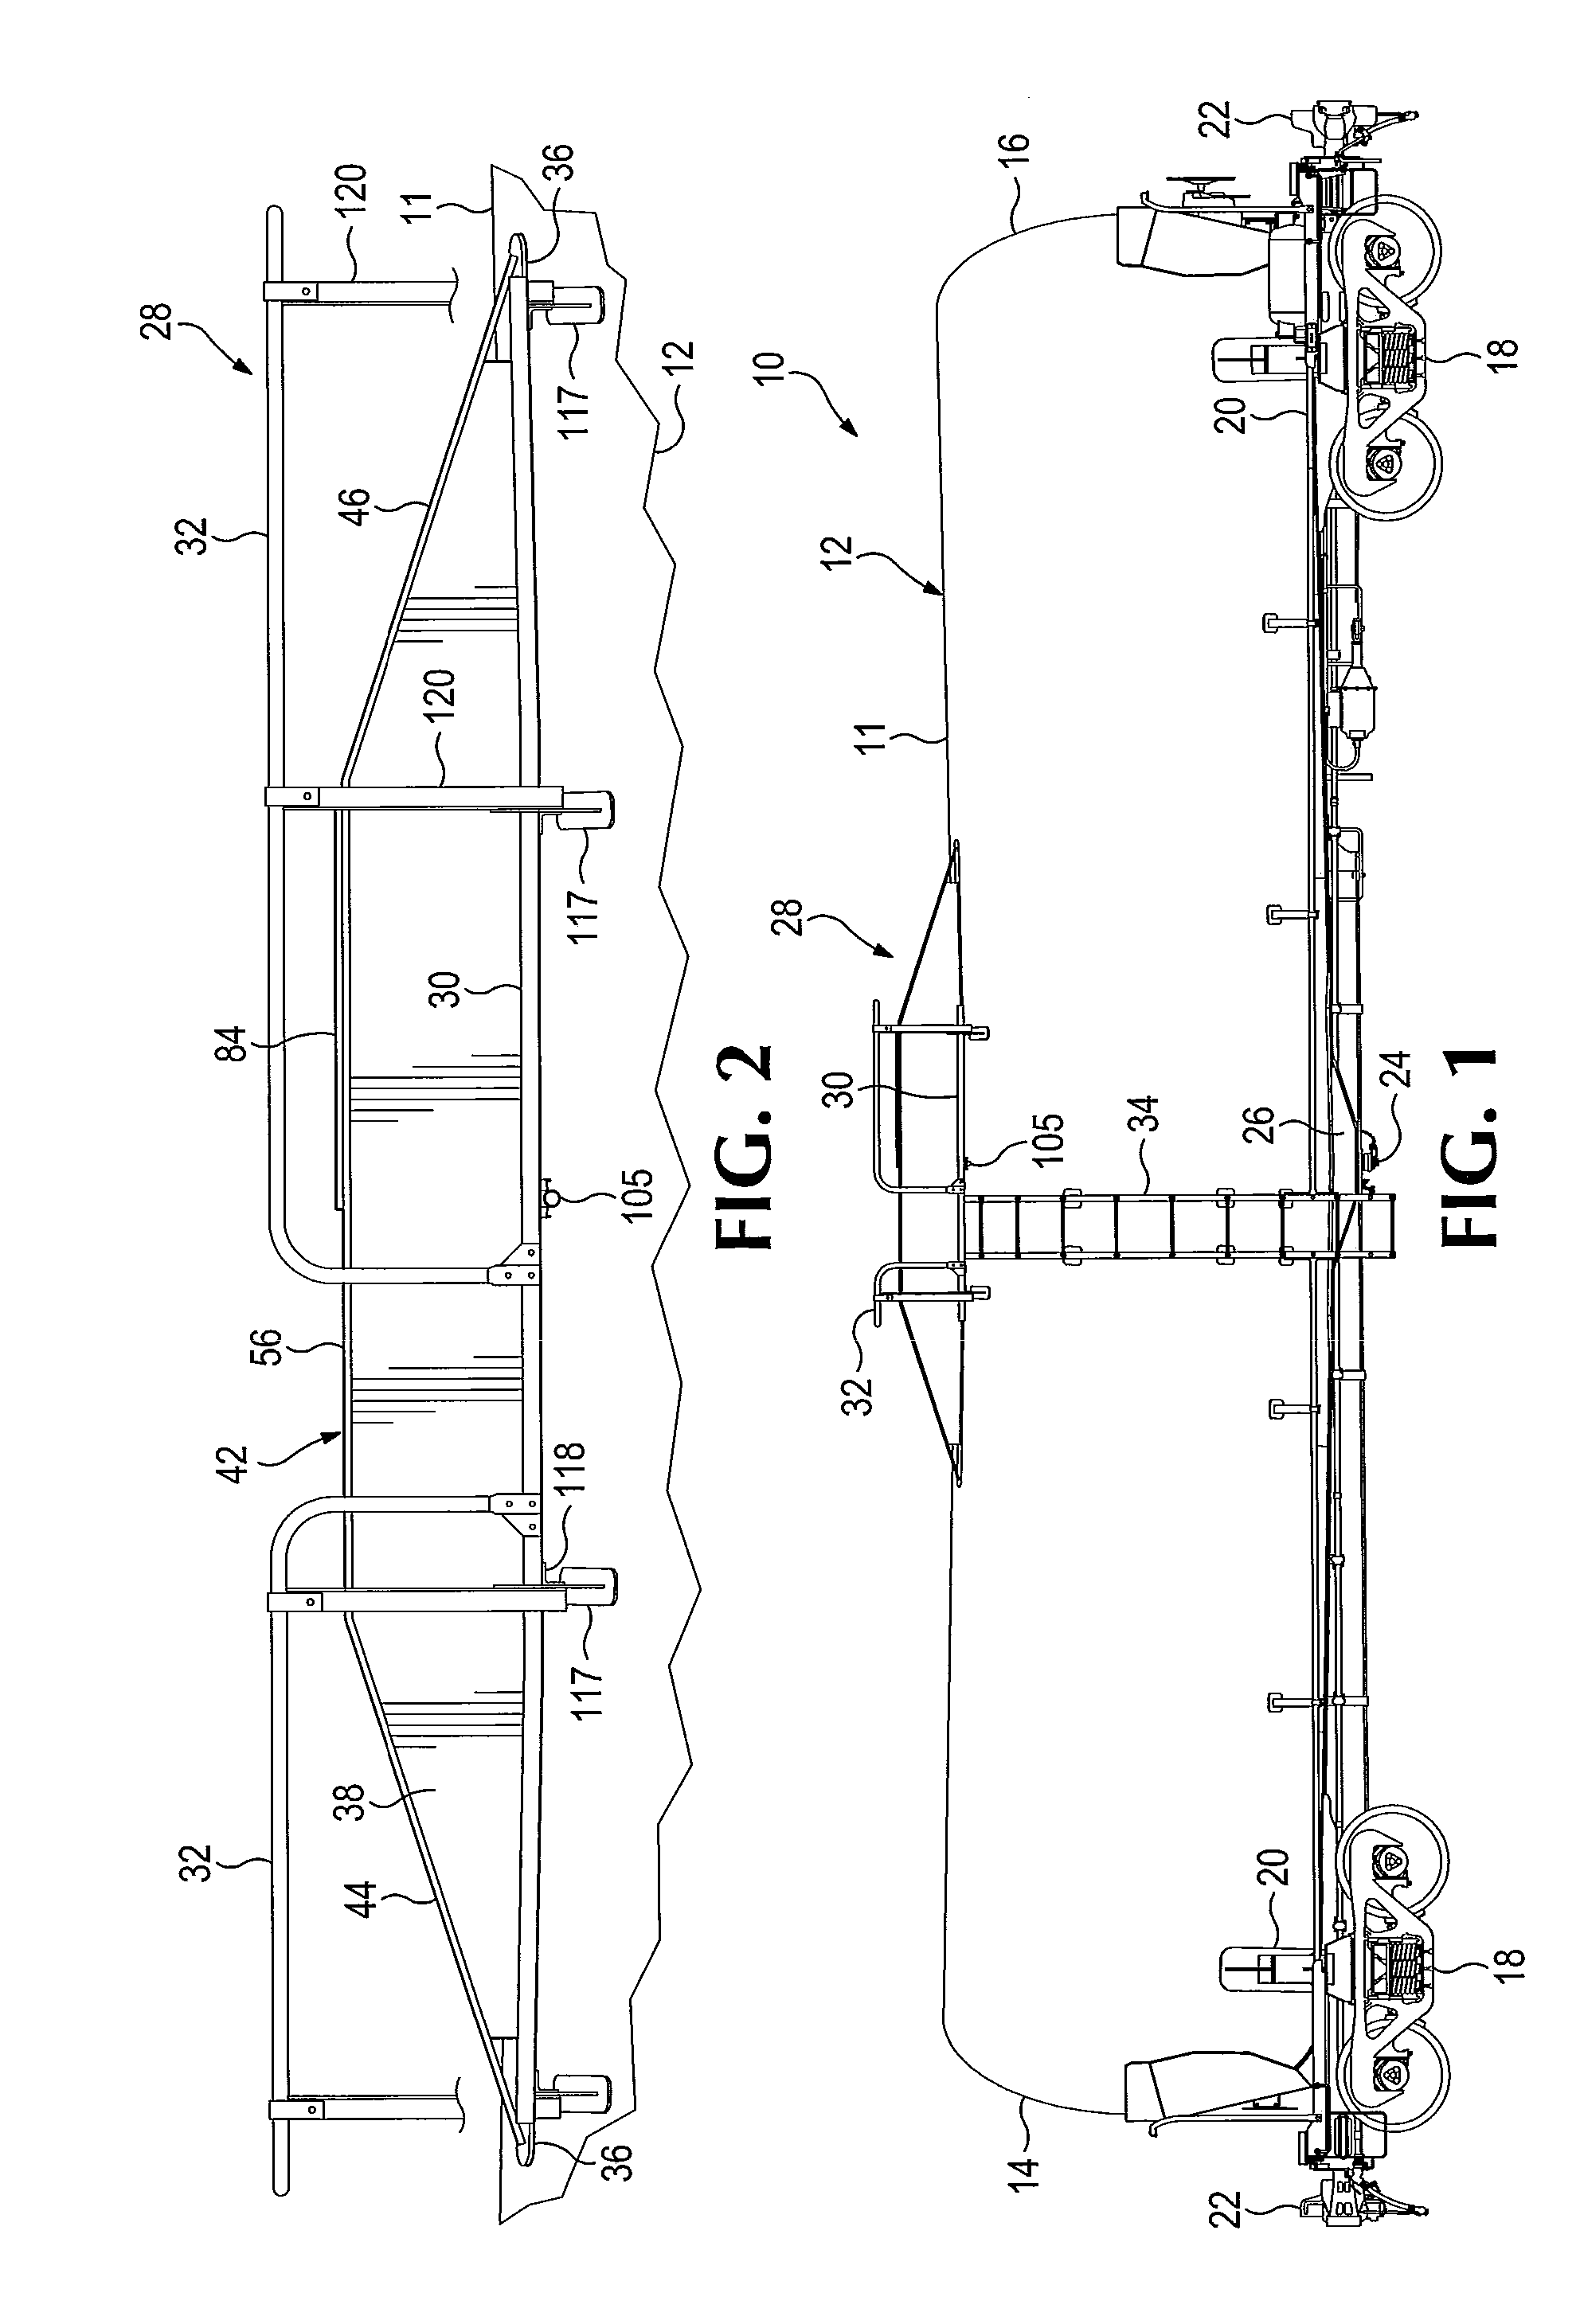 Protective structure for top of tank car